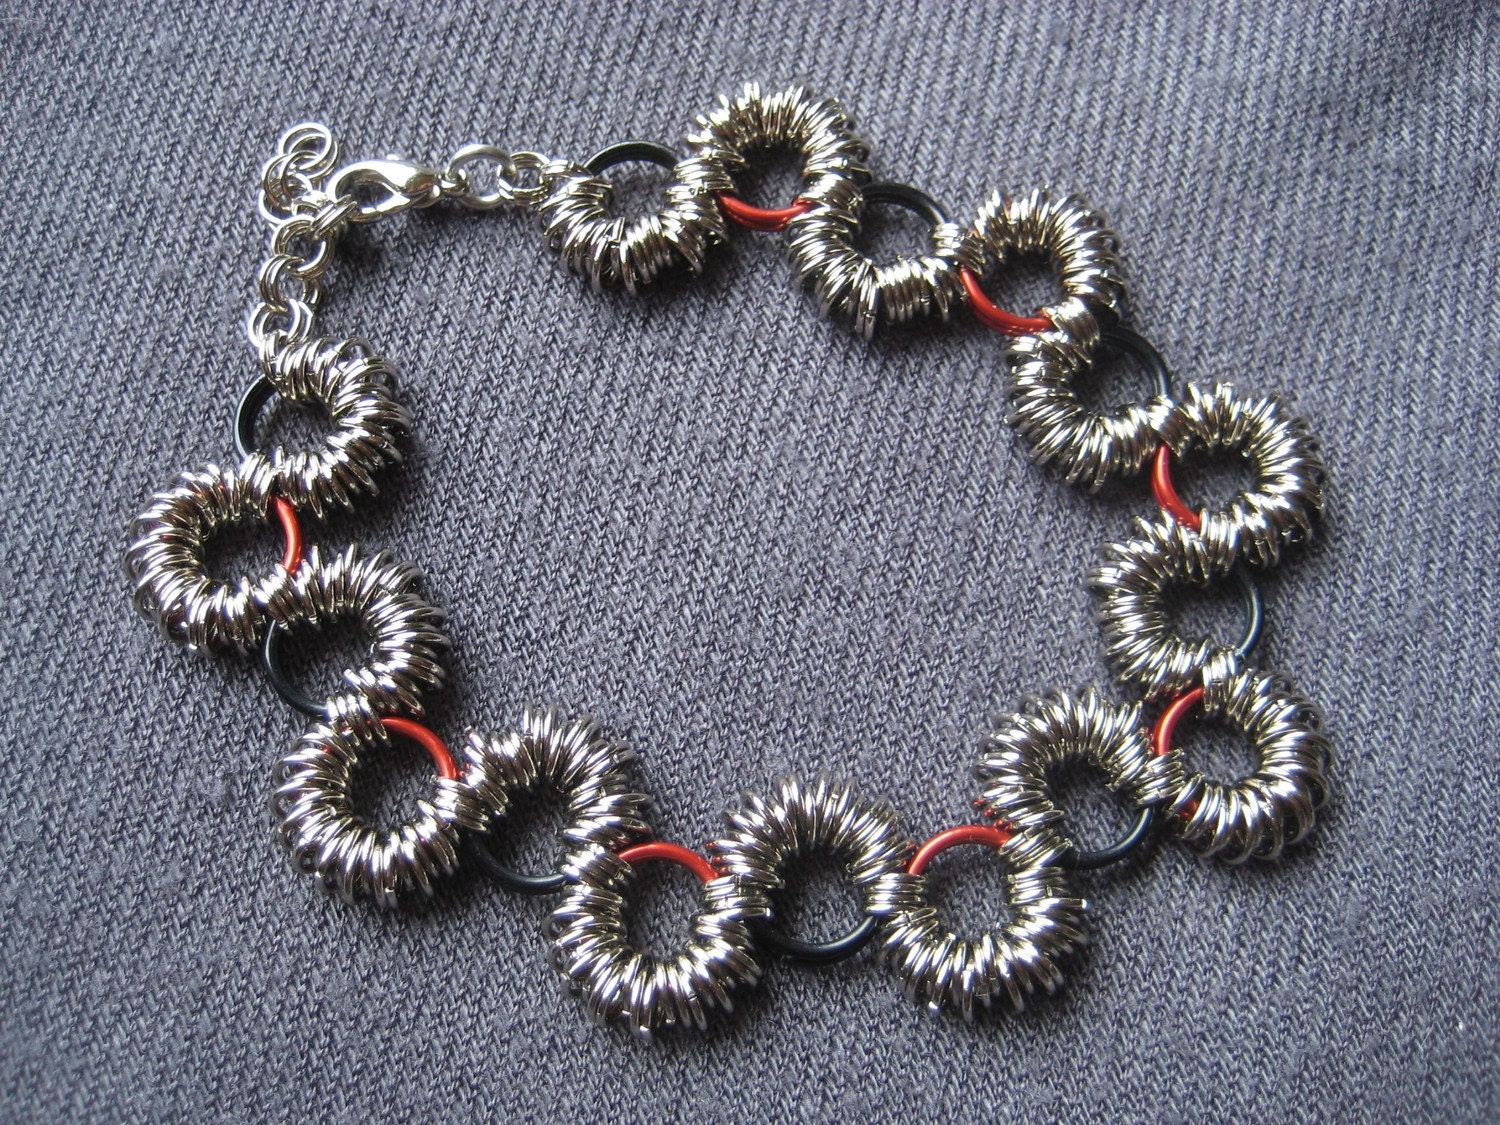 Chainmaille "Coiled" Style  Snake Bracelet